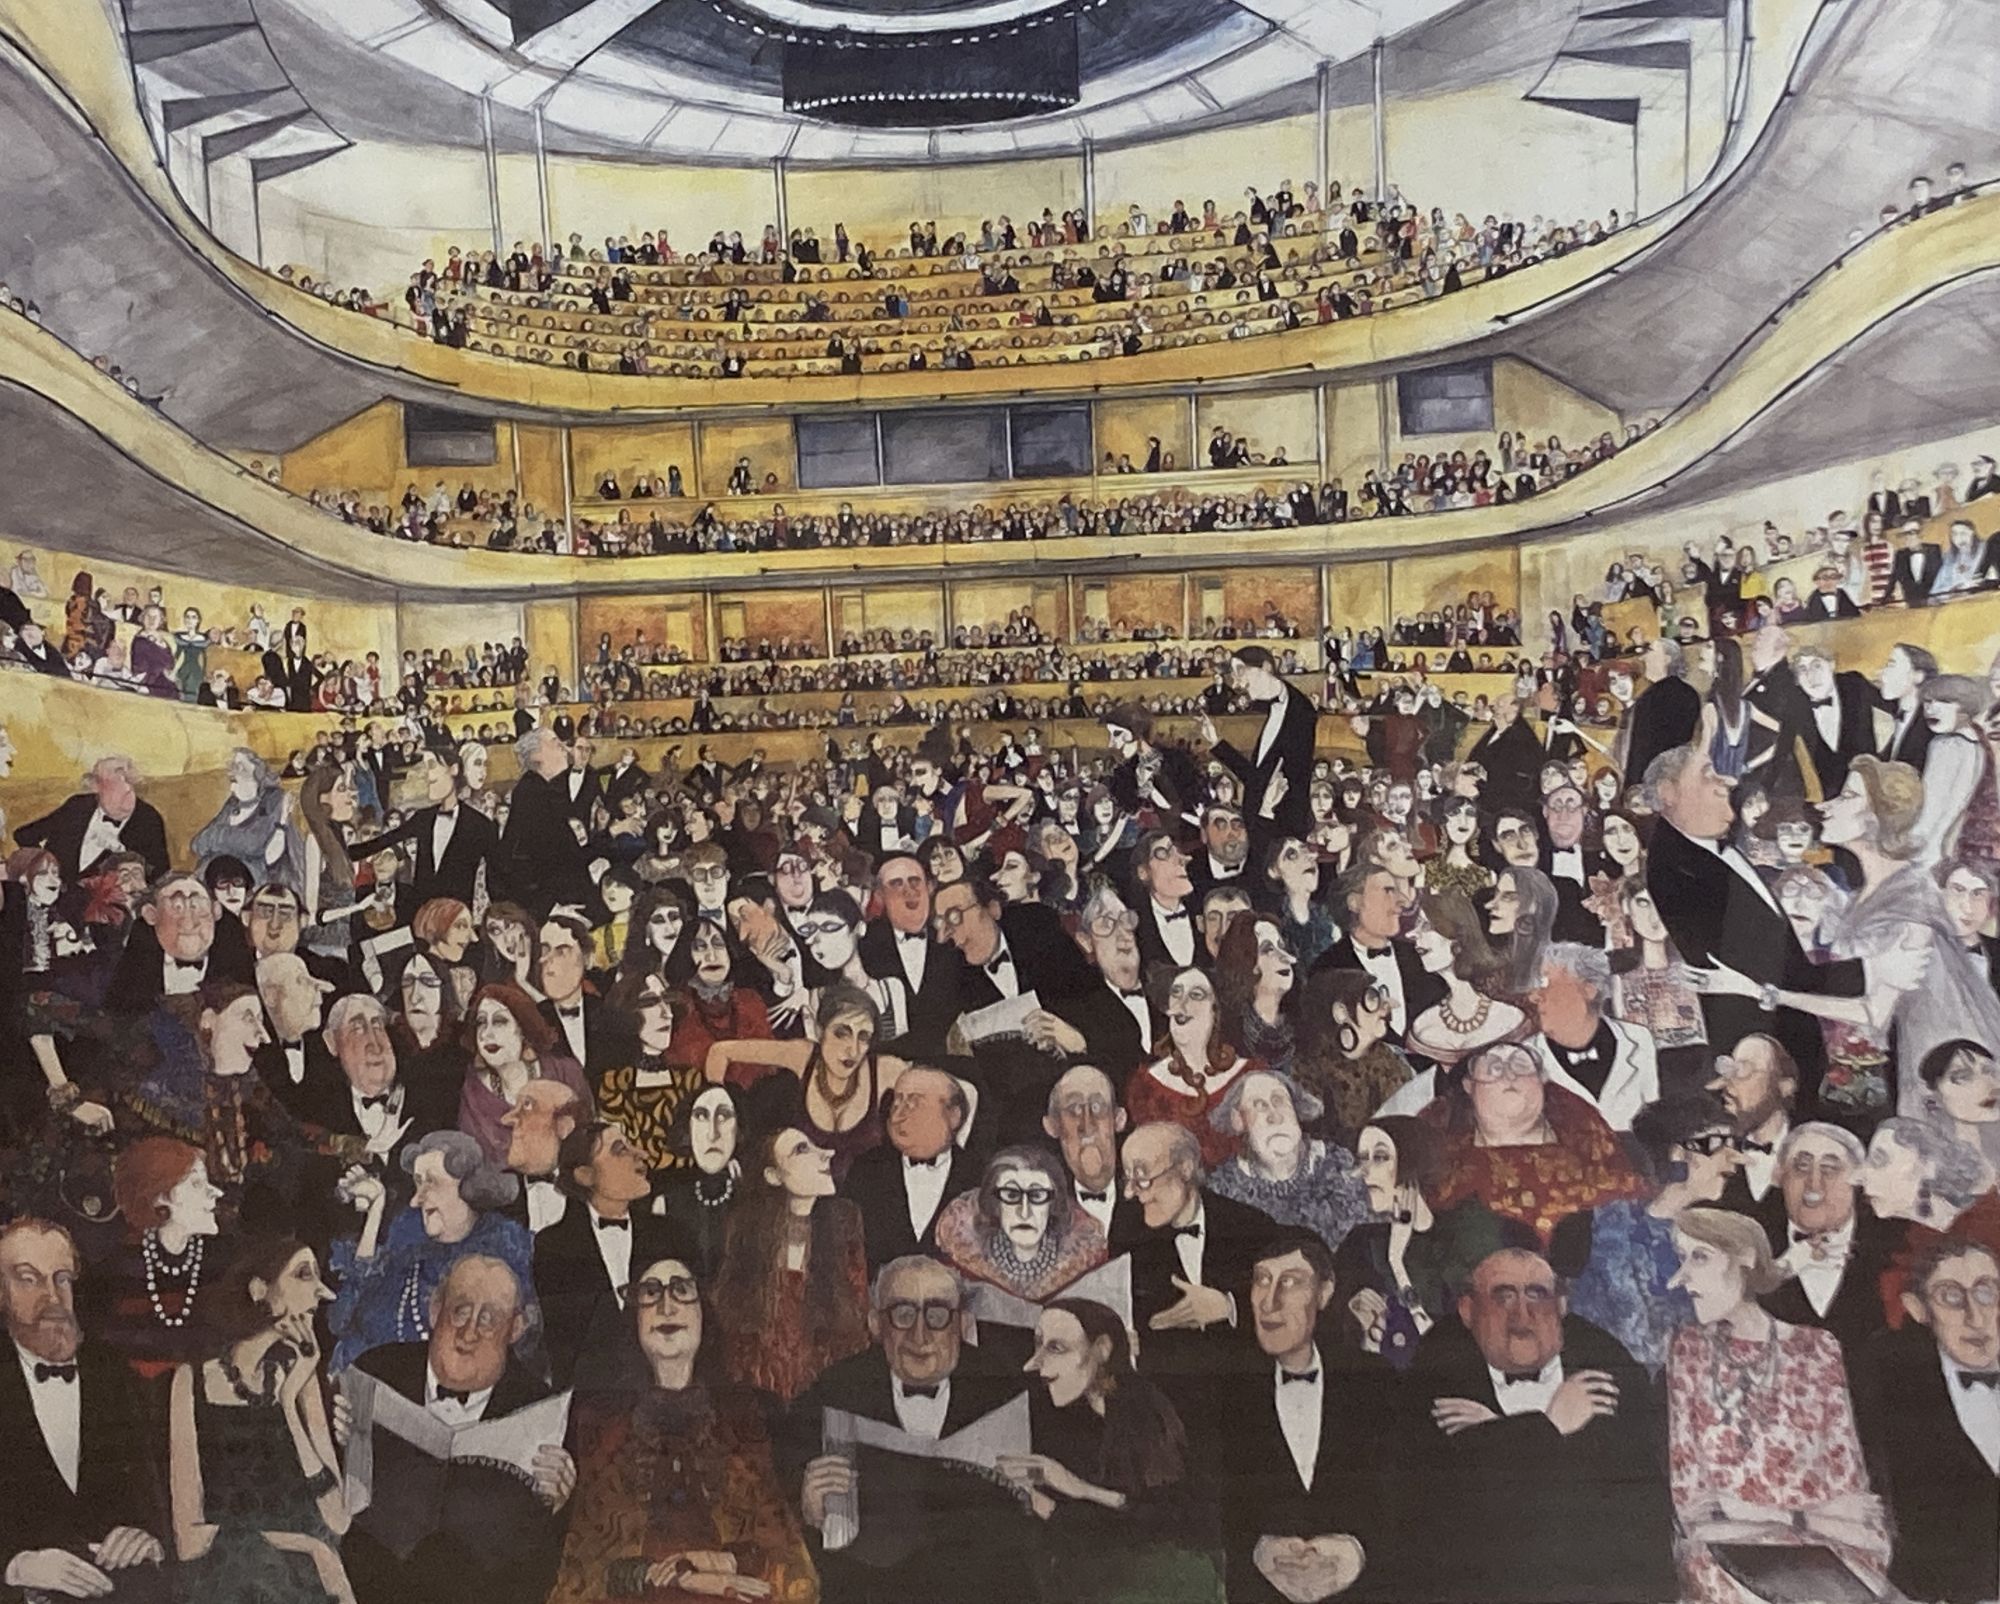 Sue Macartney-Snape, limited edition print, Glyndebourne II, signed in pencil, 579/1250, 53 x 68cm